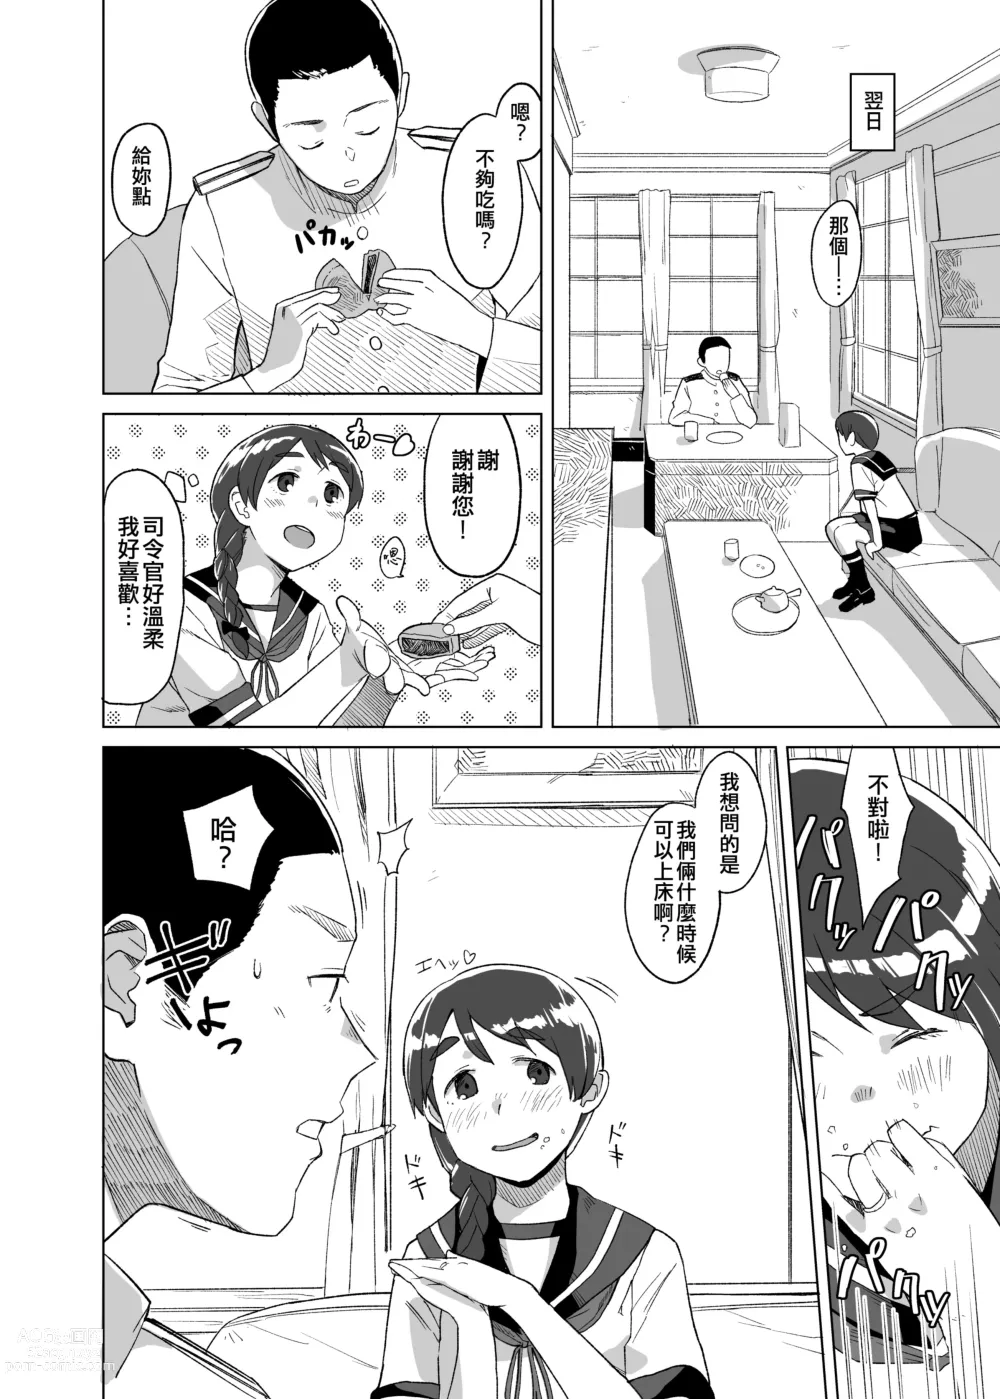 Page 4 of doujinshi Ding Dong